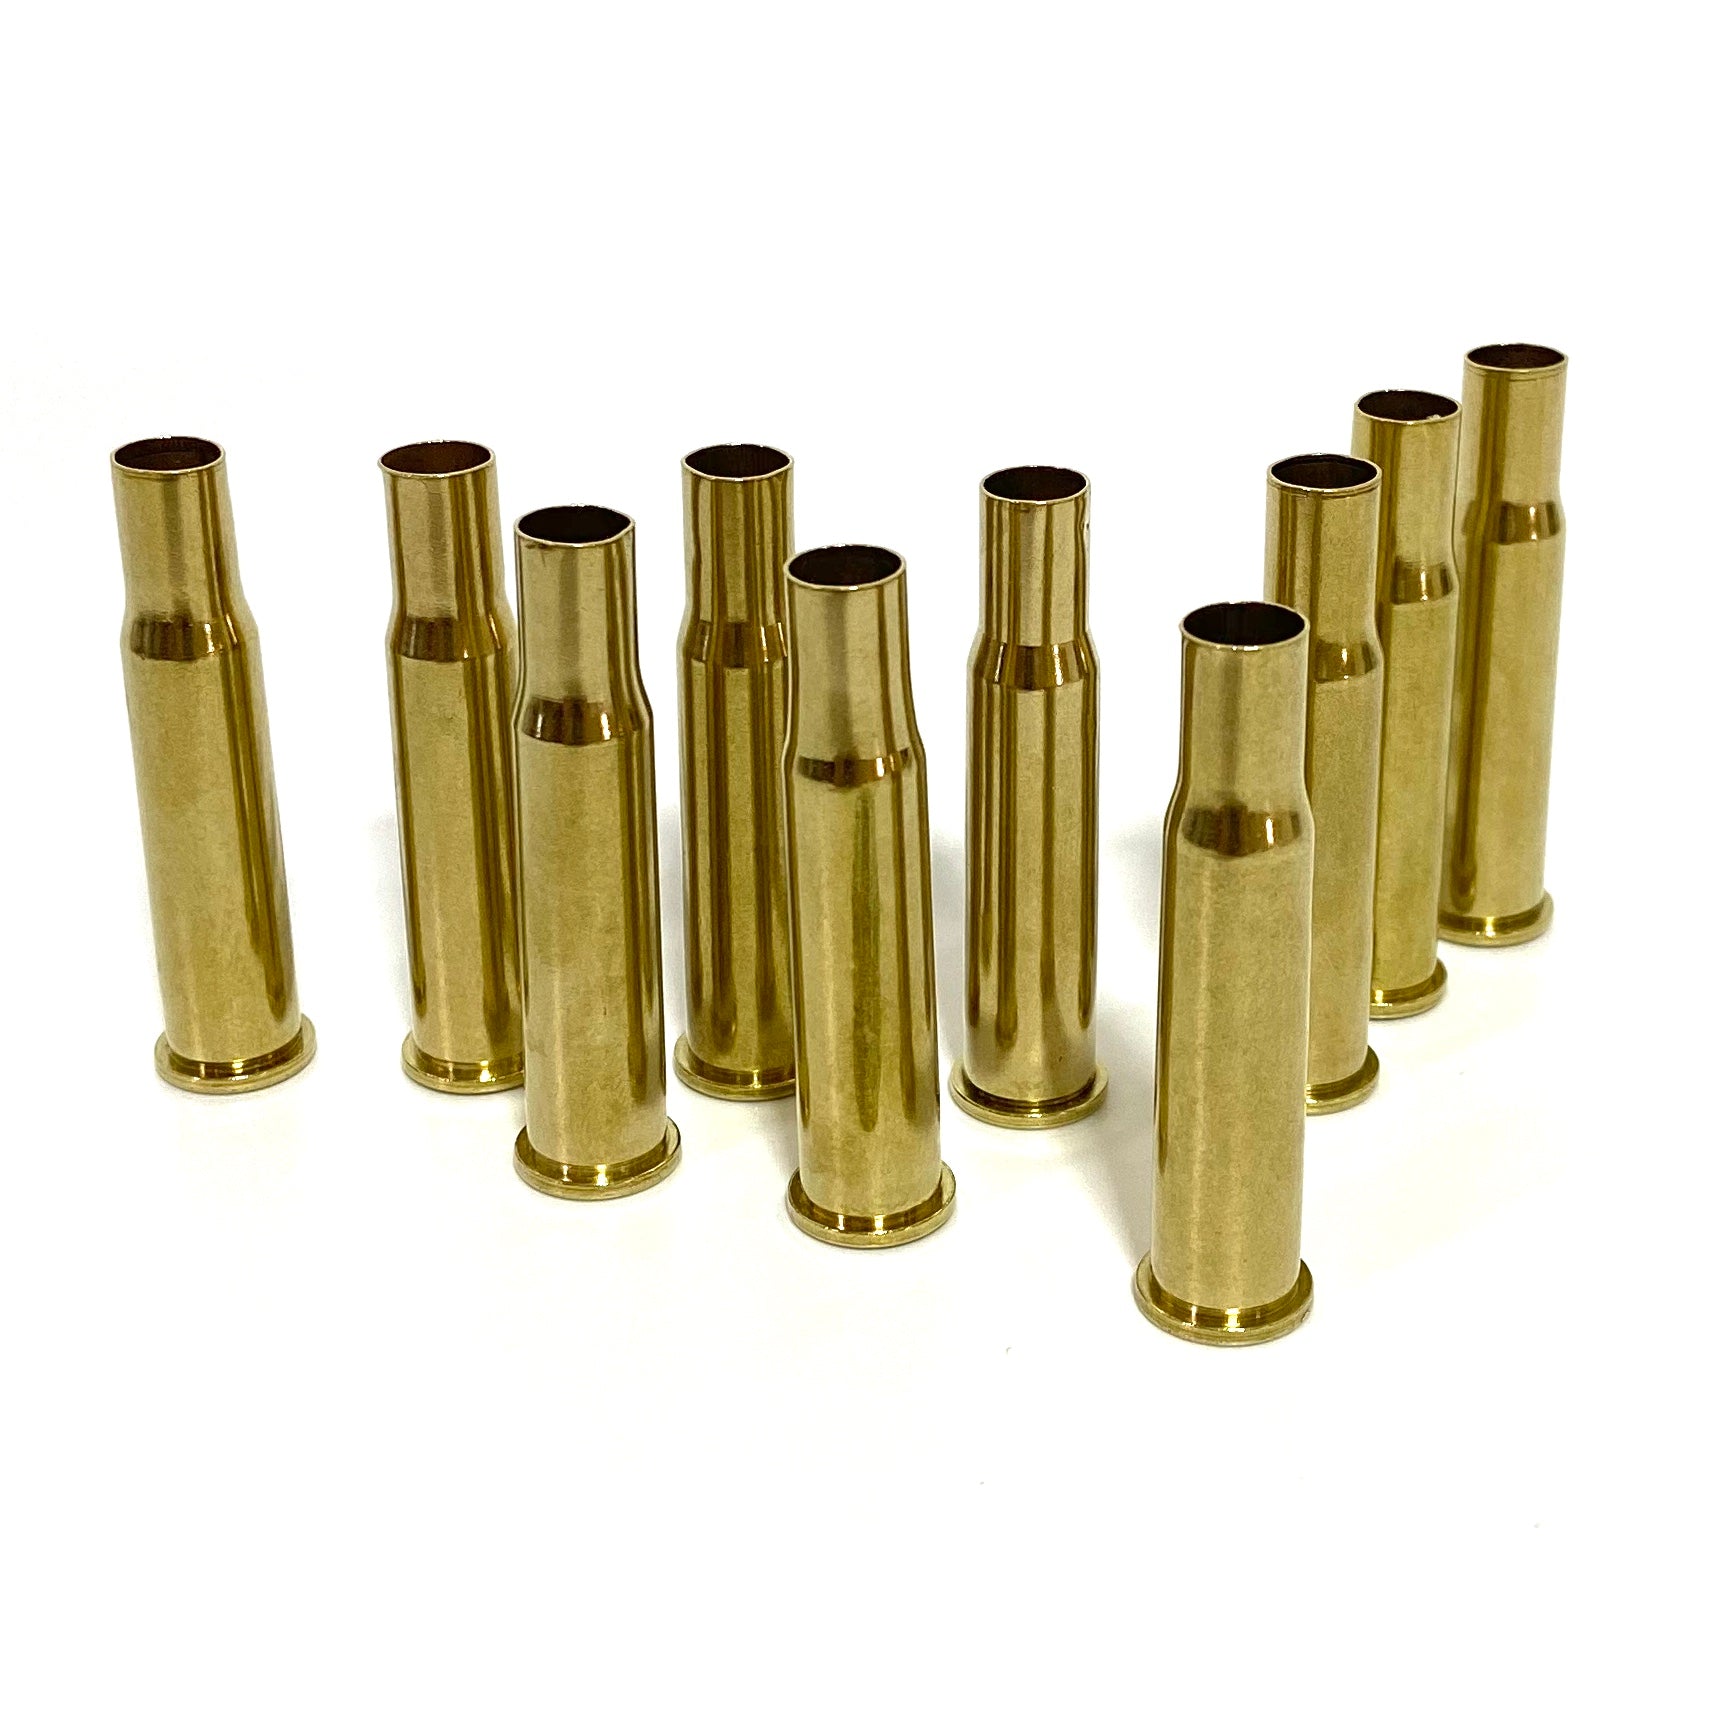 30-30 Winchester Brass - Large Rifle - Brass Cases